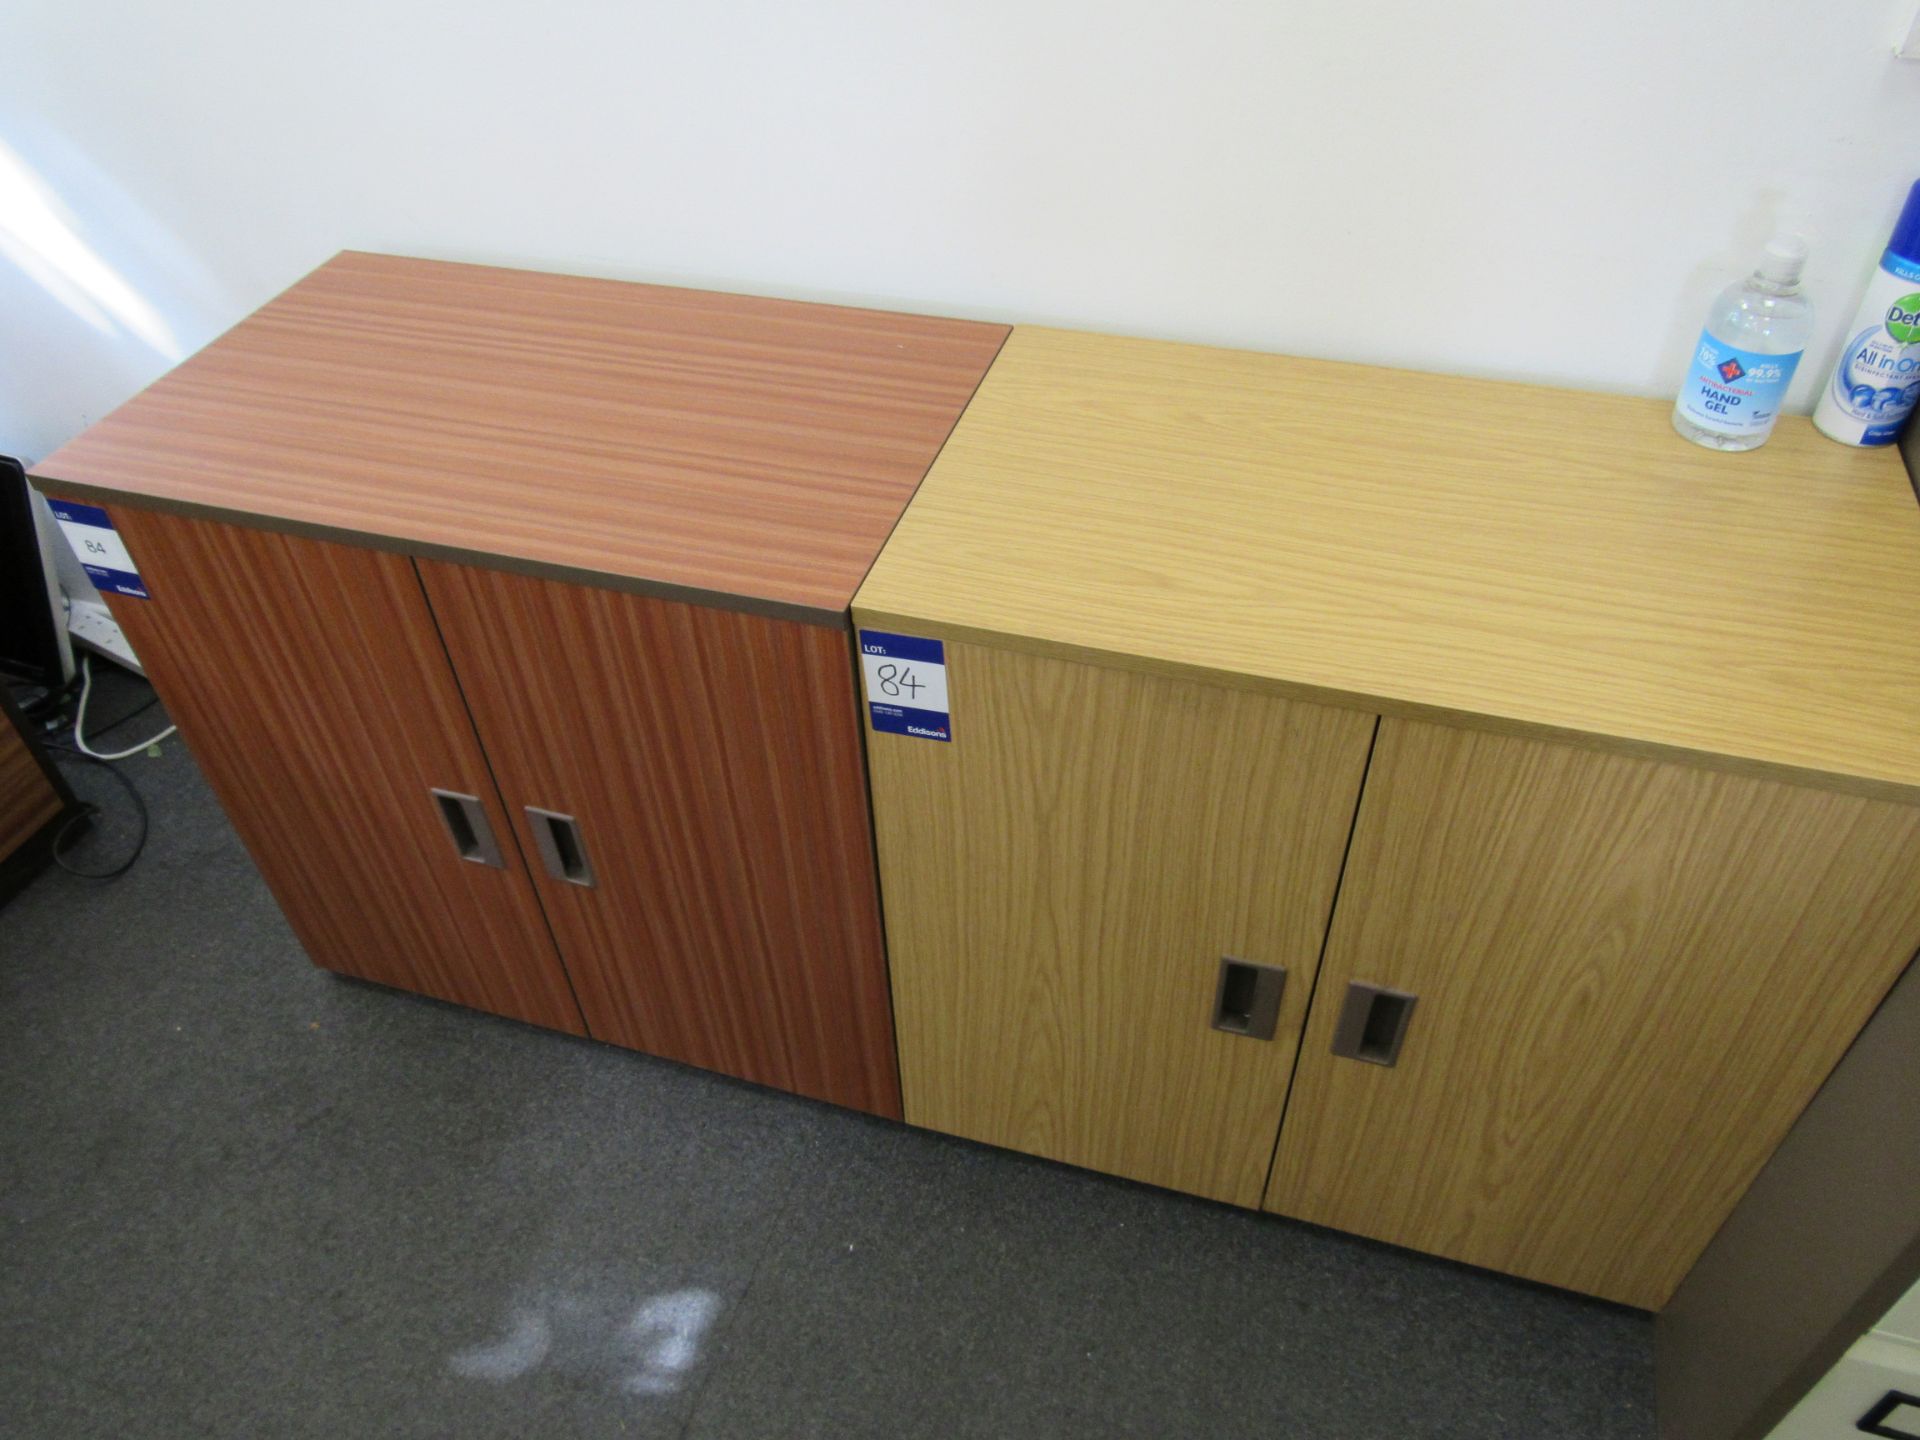 4 x Assorted low level double door cupboards (Approximately 750 x 710 x 450), to first floor office